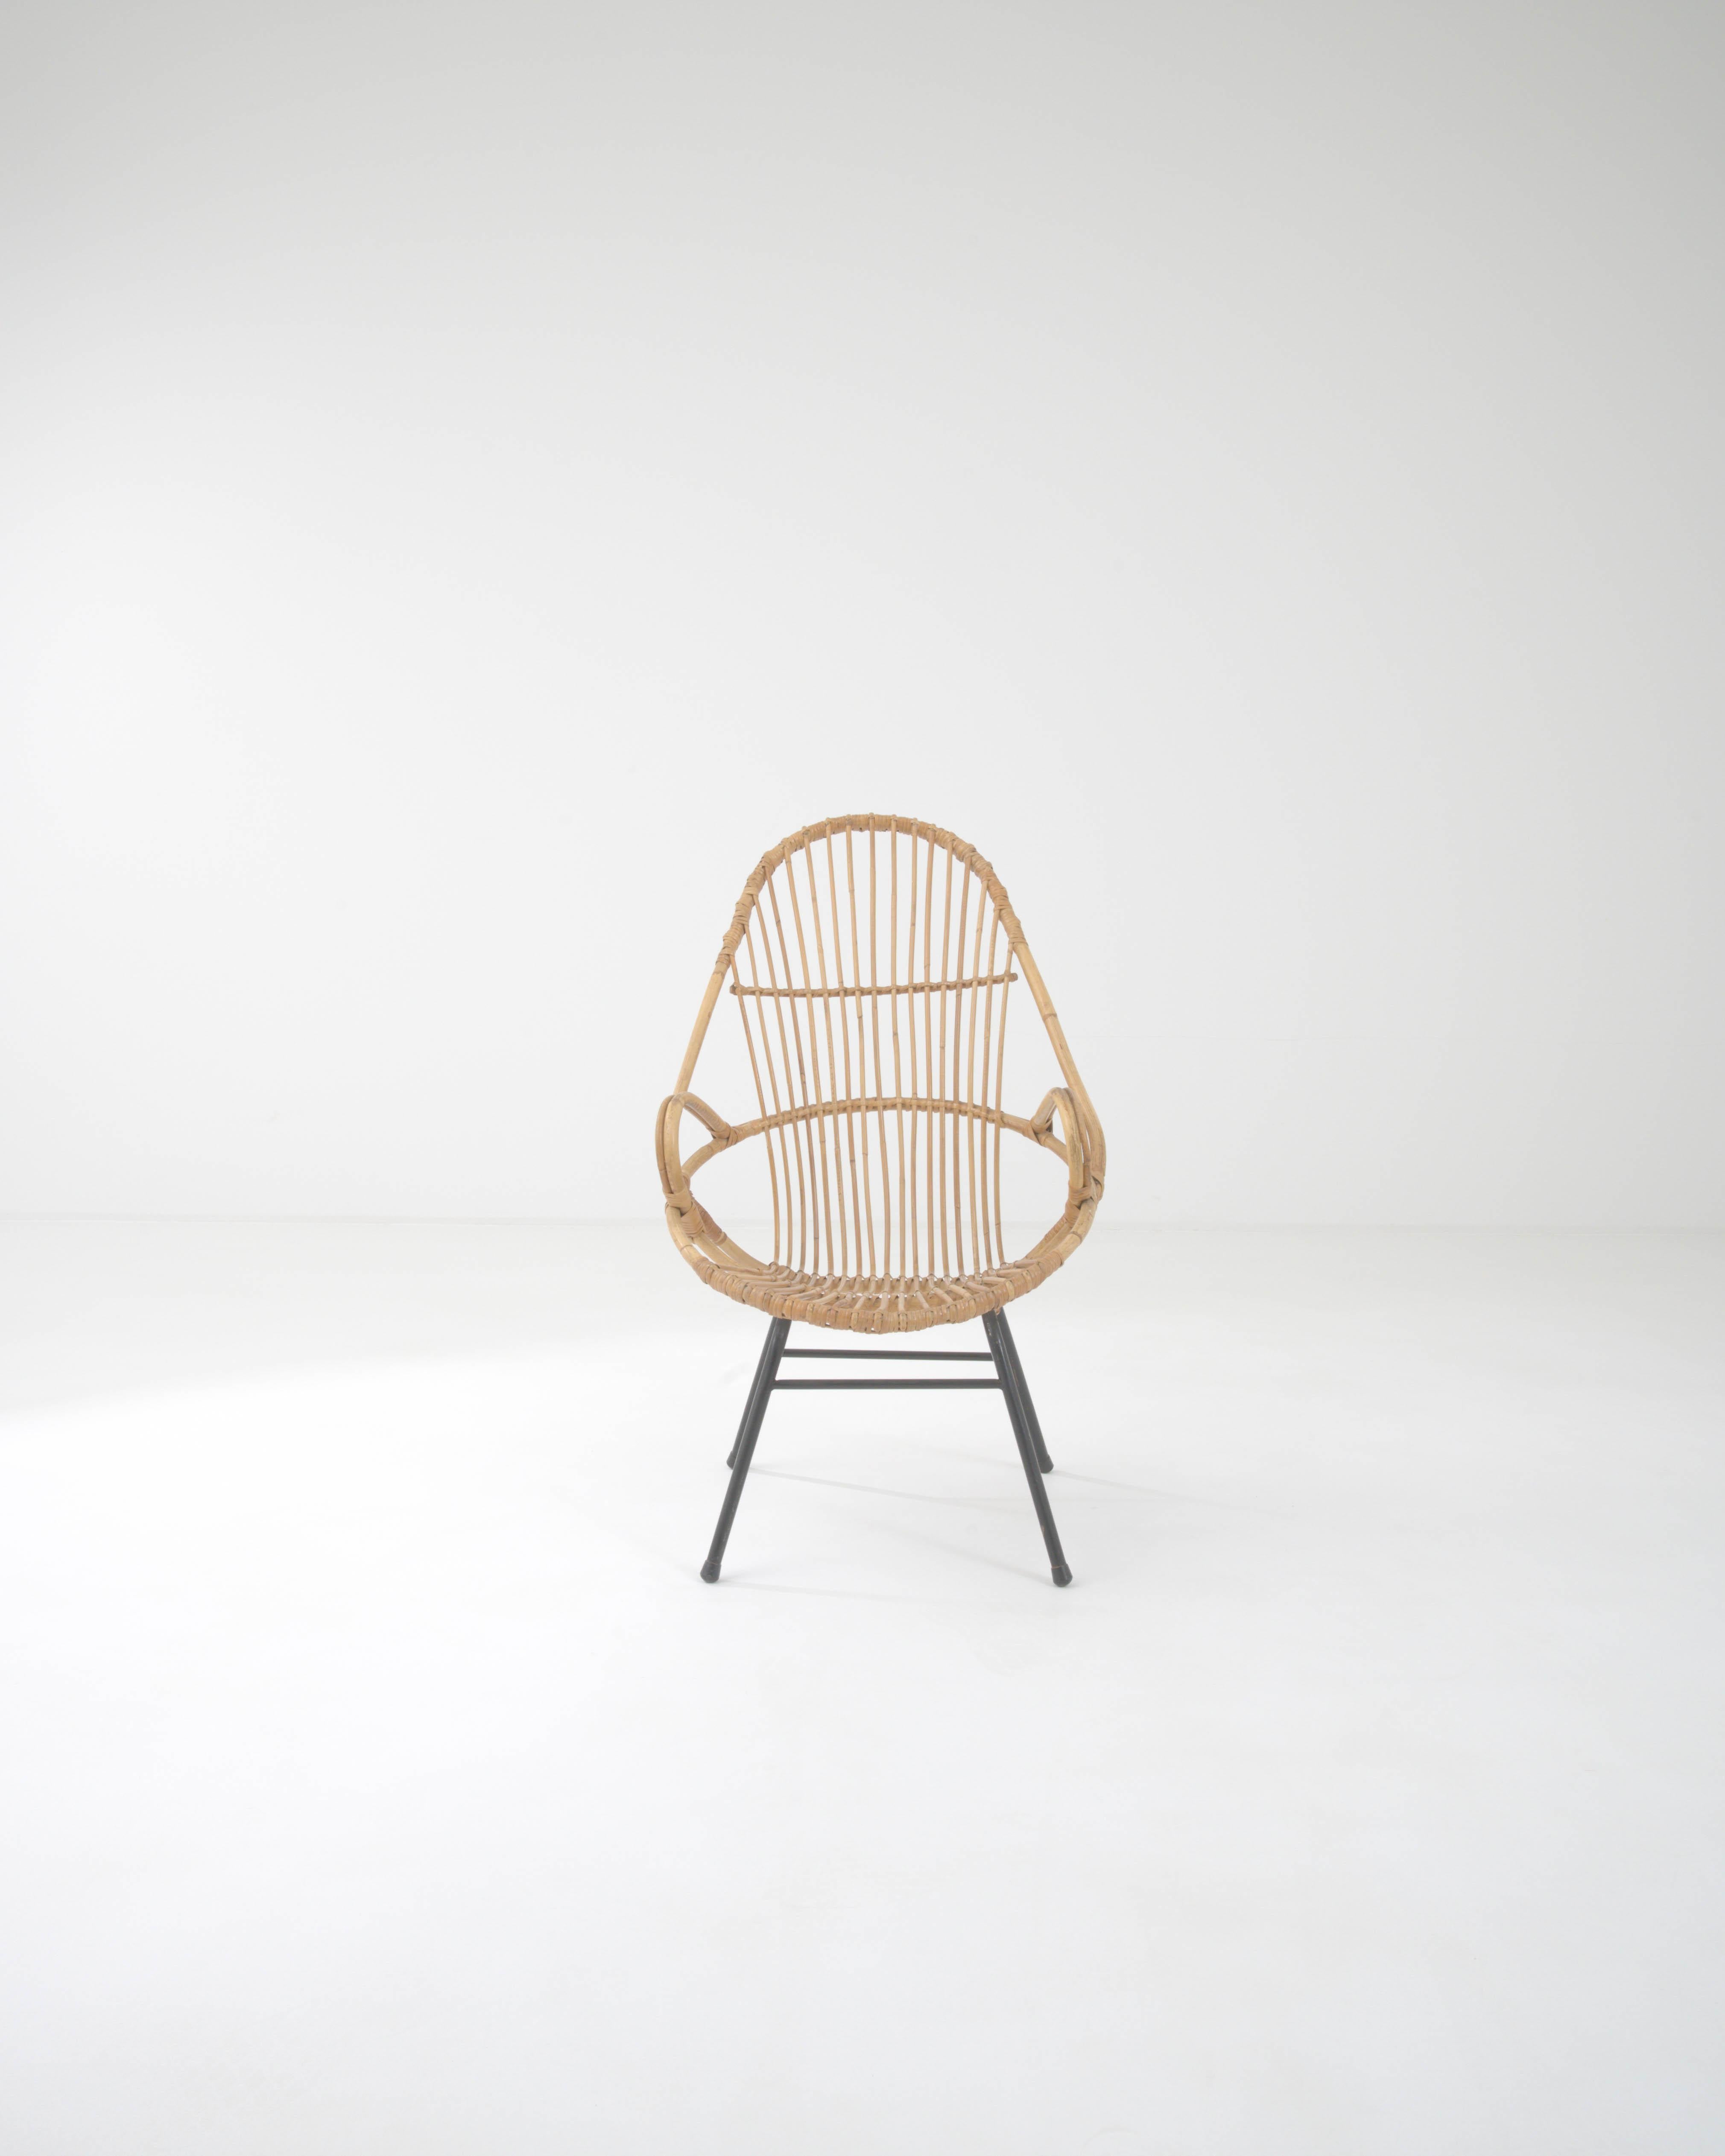 An occasional chair from France, circa 1960. This french-made armchair is a playful twist on a midcentury classic. Using lashed together rattan, artisans have crafted a chair both geometrically pleasing and surprisingly comfortable. Created by